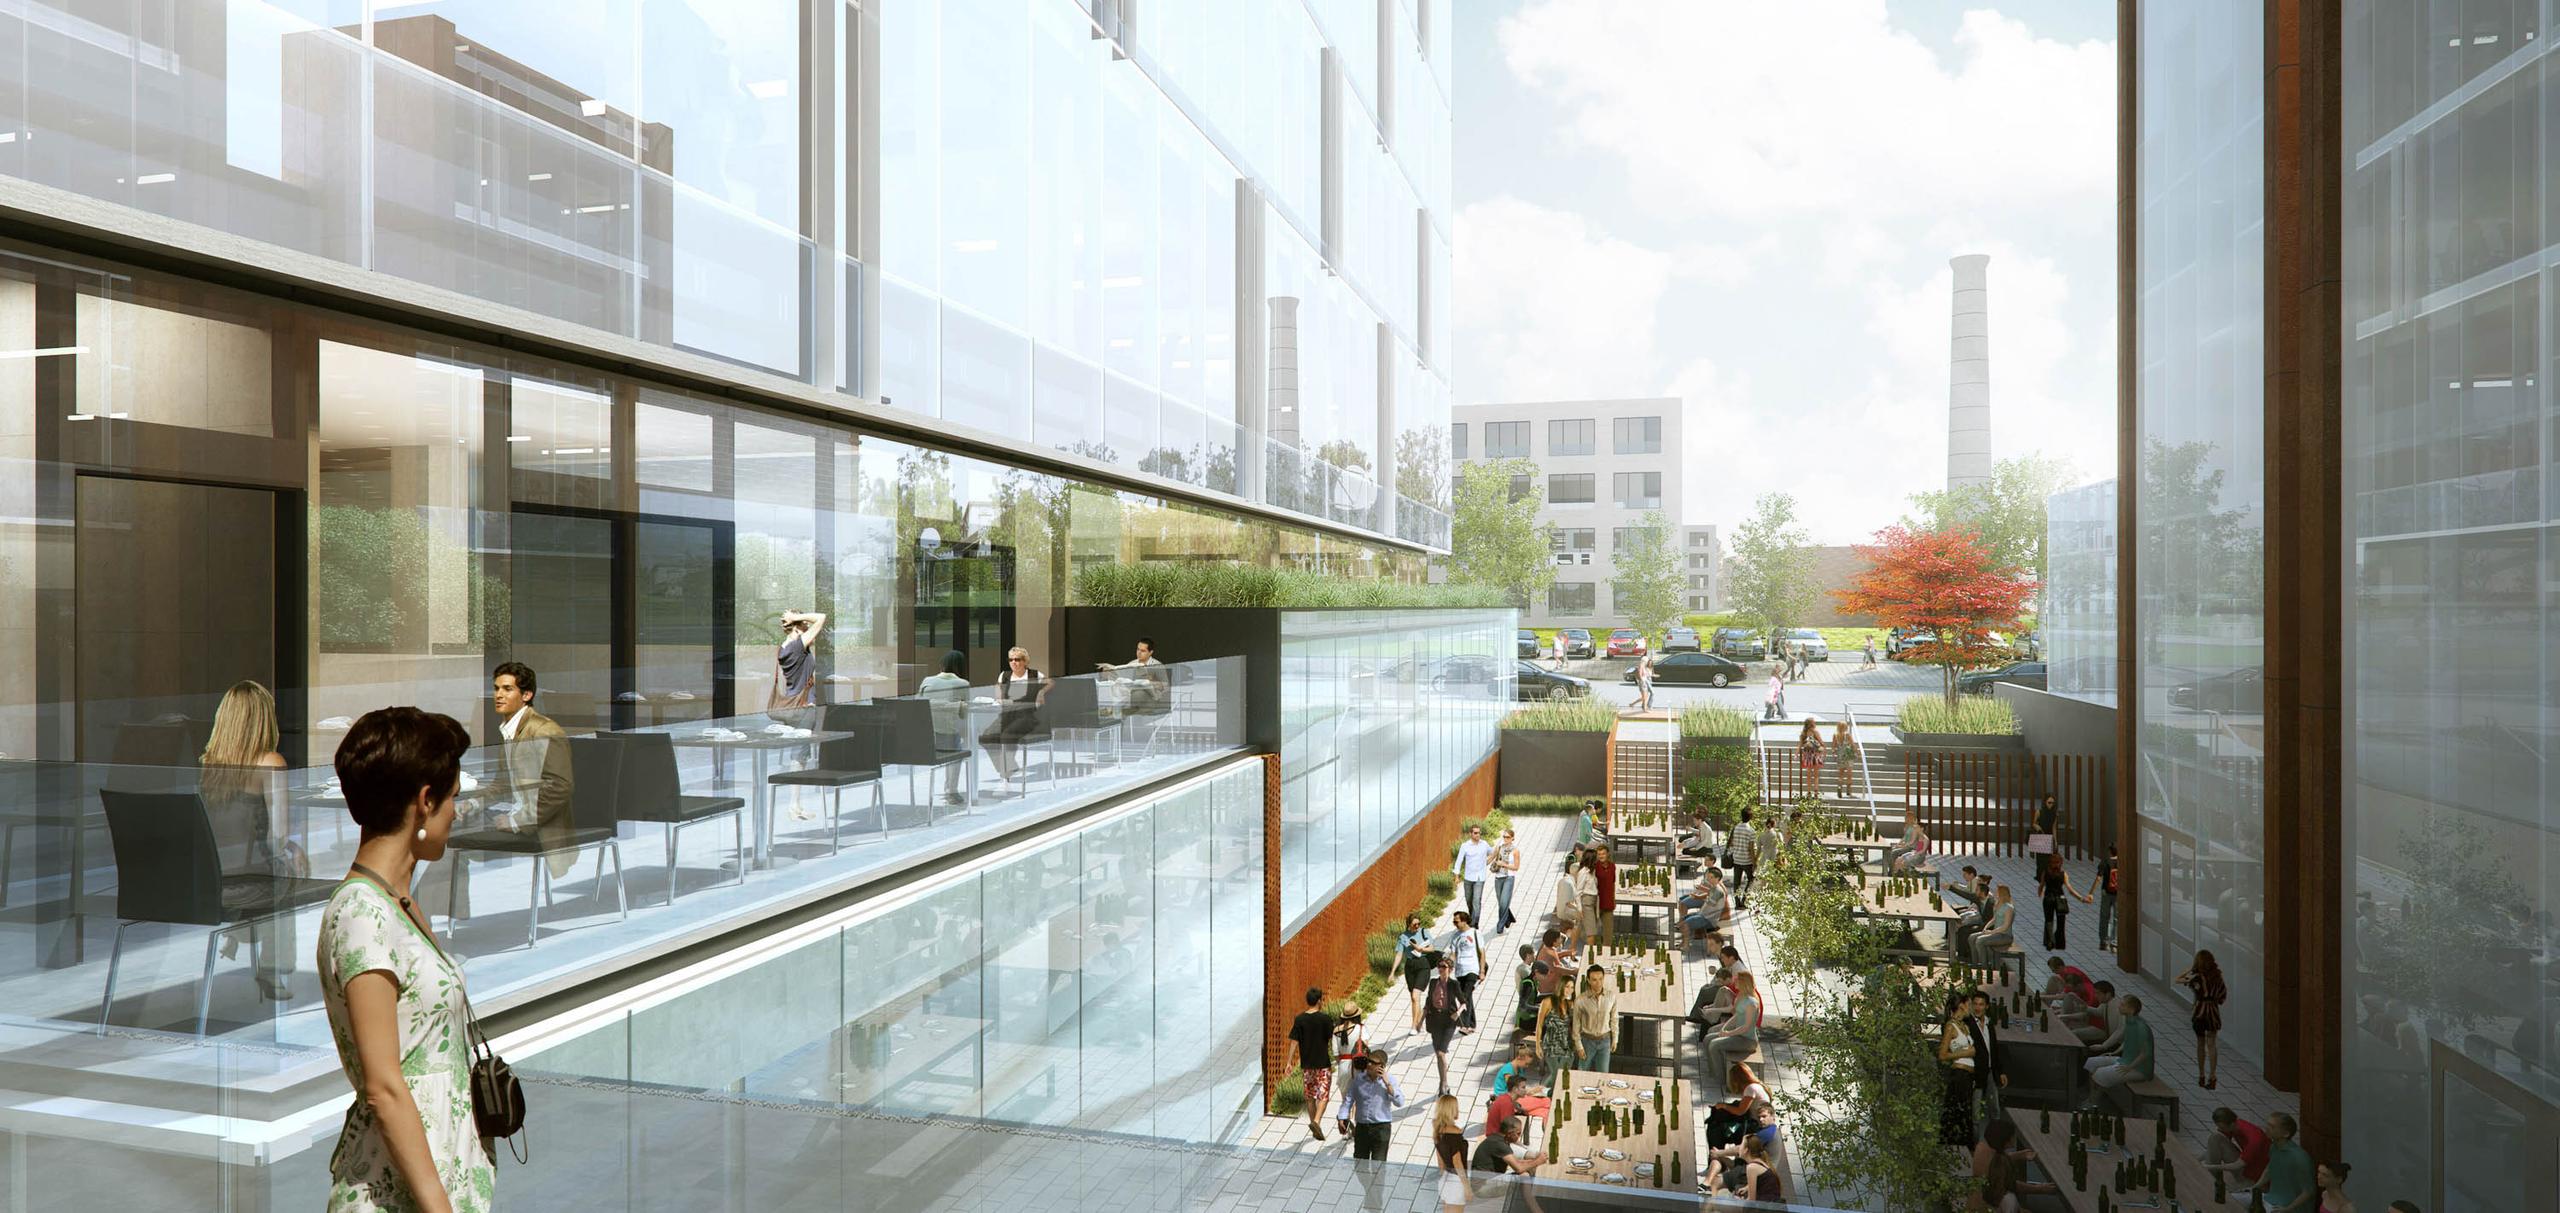 Rendering overlooking a busy patio in the shared courtyard of 60 and 80 Atlantic, with historic Liberty Village buildings in the background